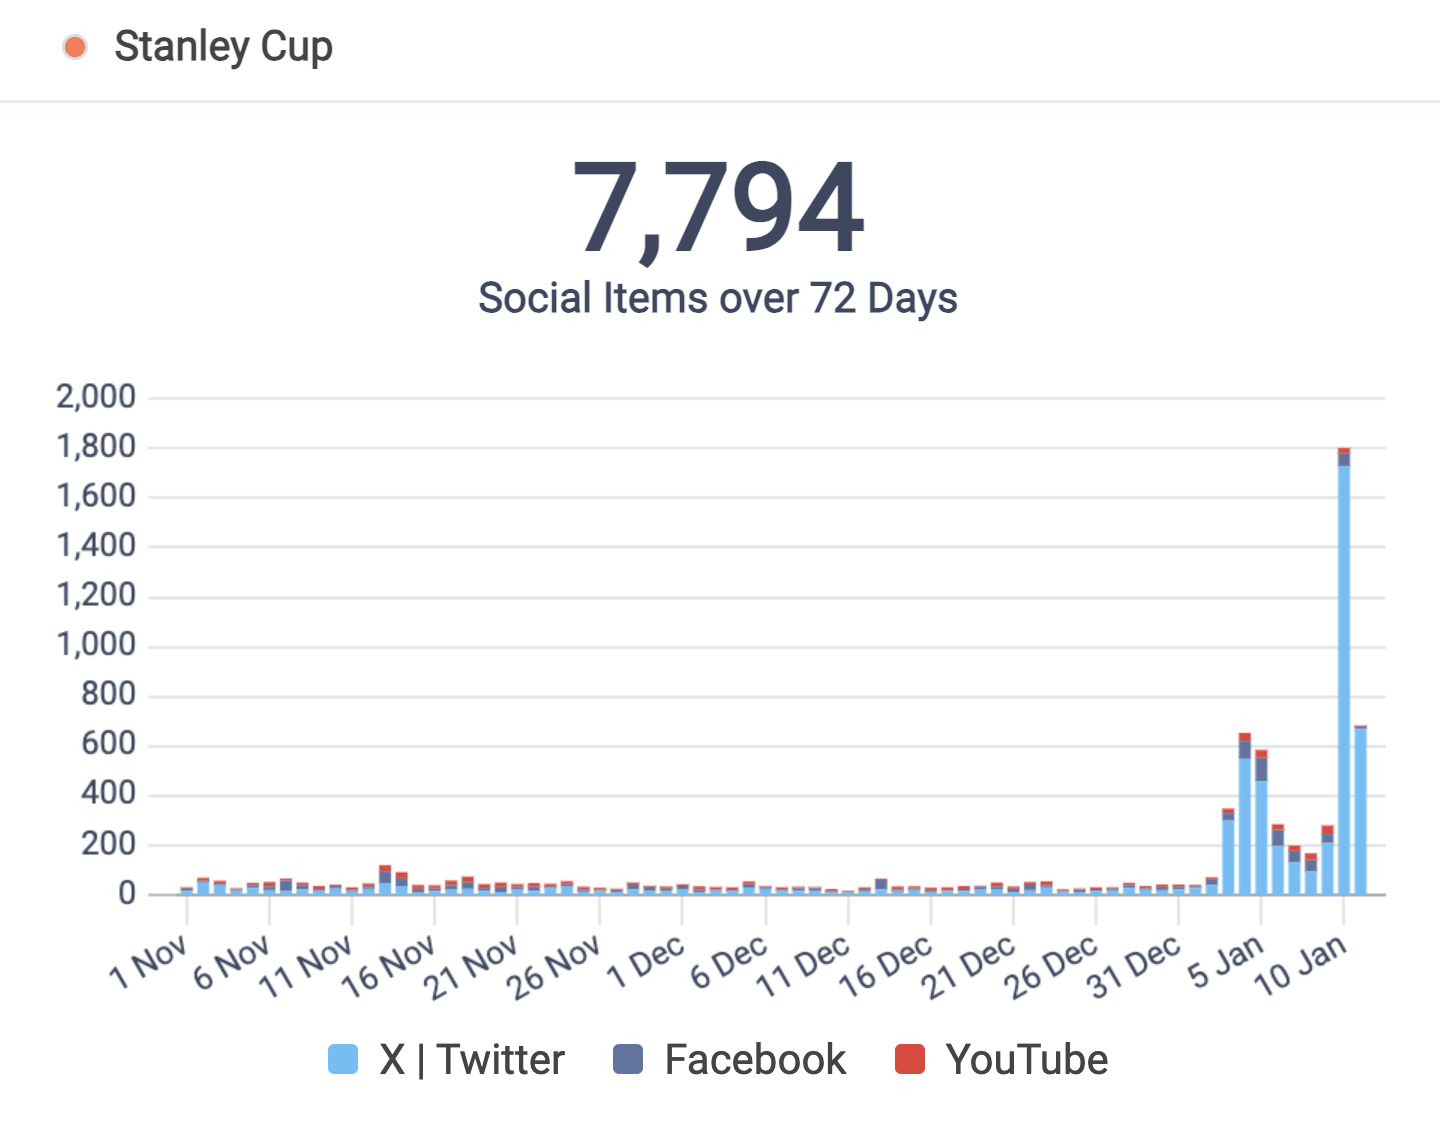 A chart from CisionOne showing social media mentions of Stanley Cup across Facebook, X, and YouTube, peaking in Jan 2024